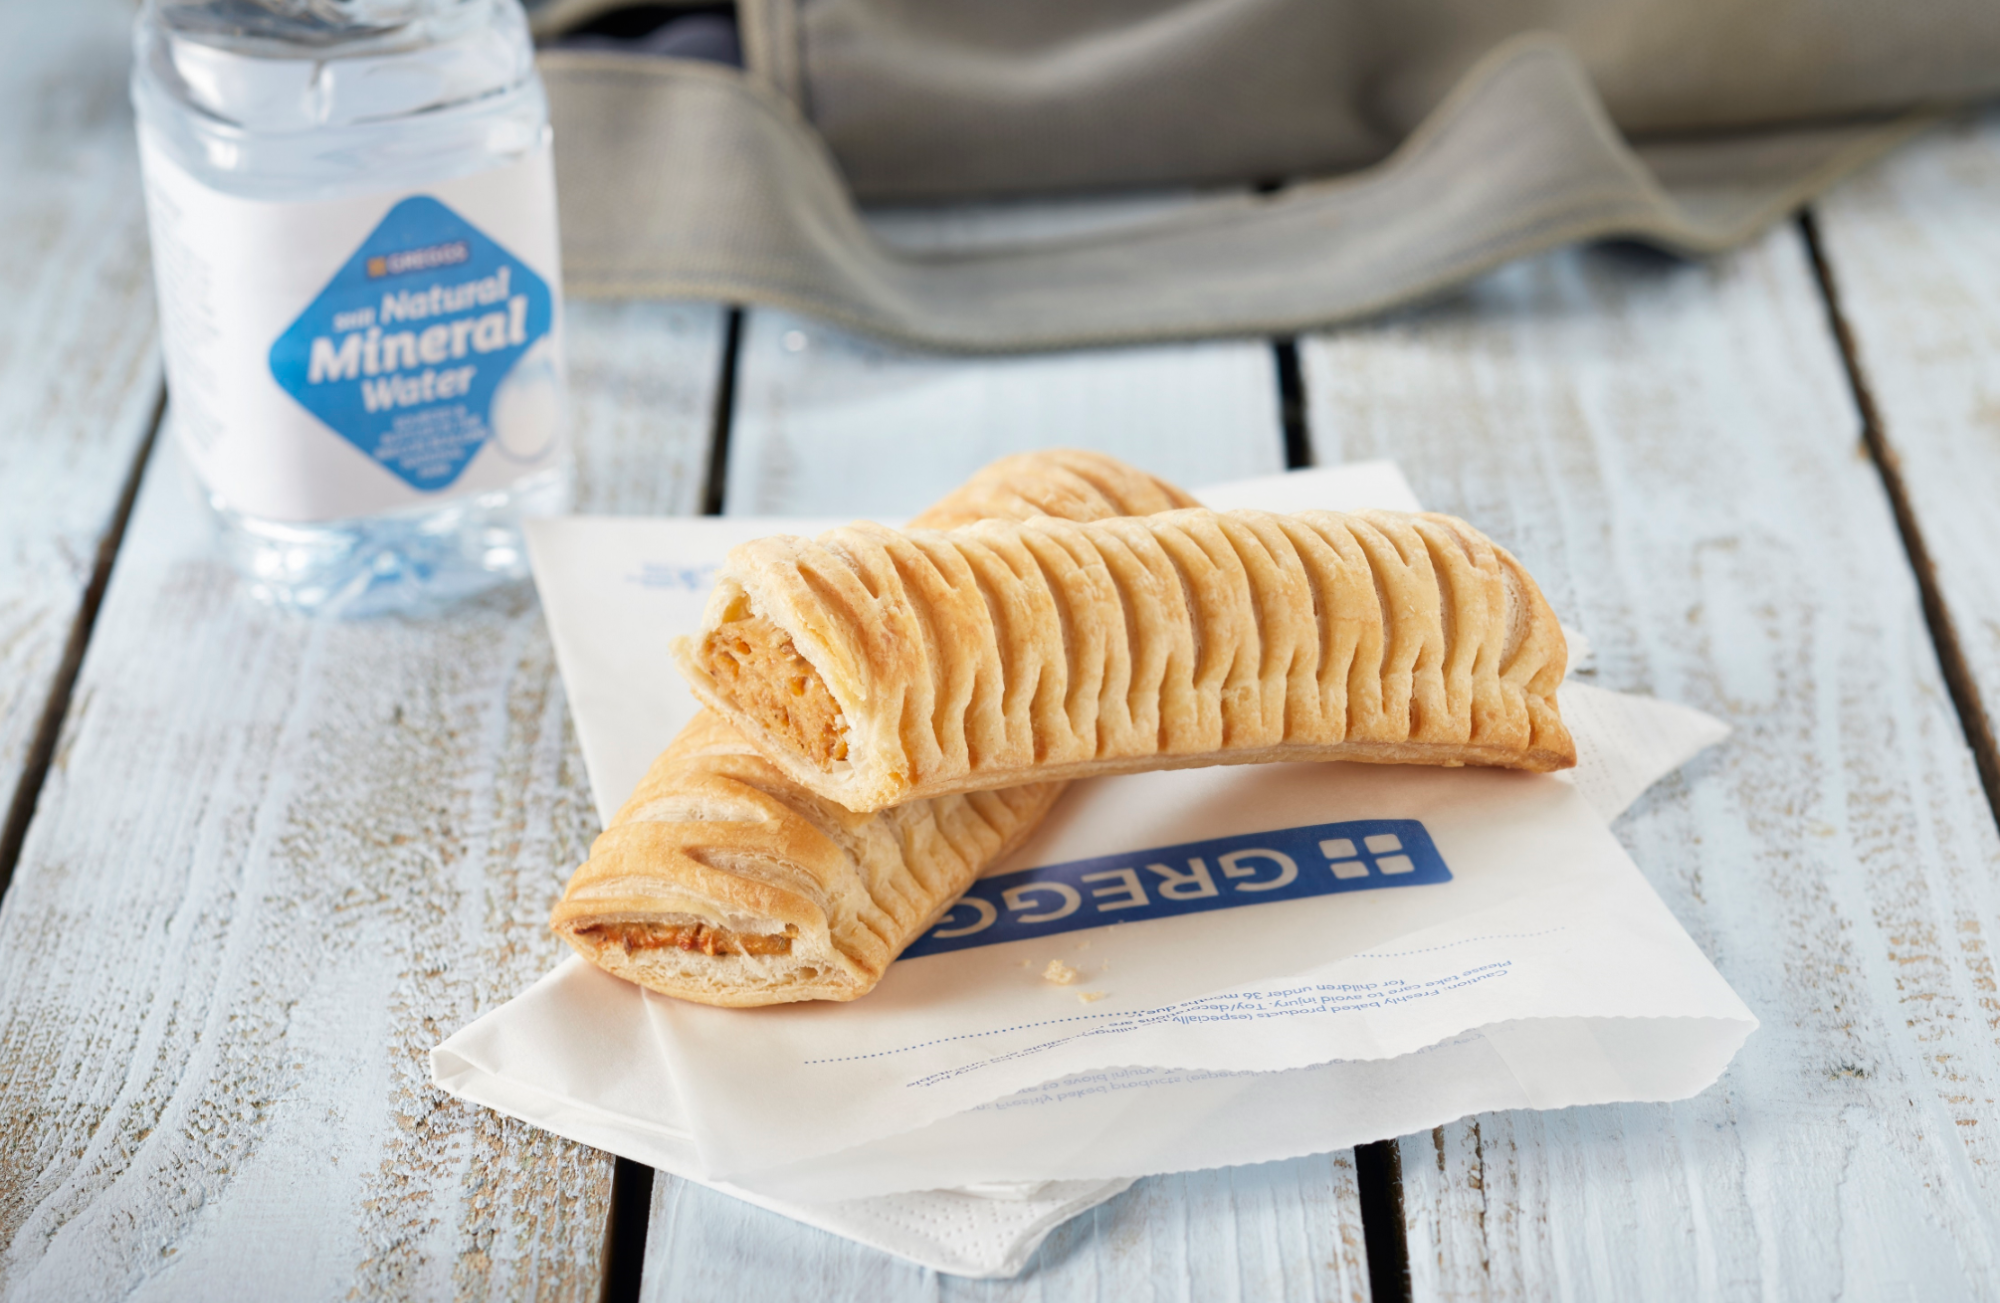 Greggs vegan sausage roll hit by supply chain disruption, Business News